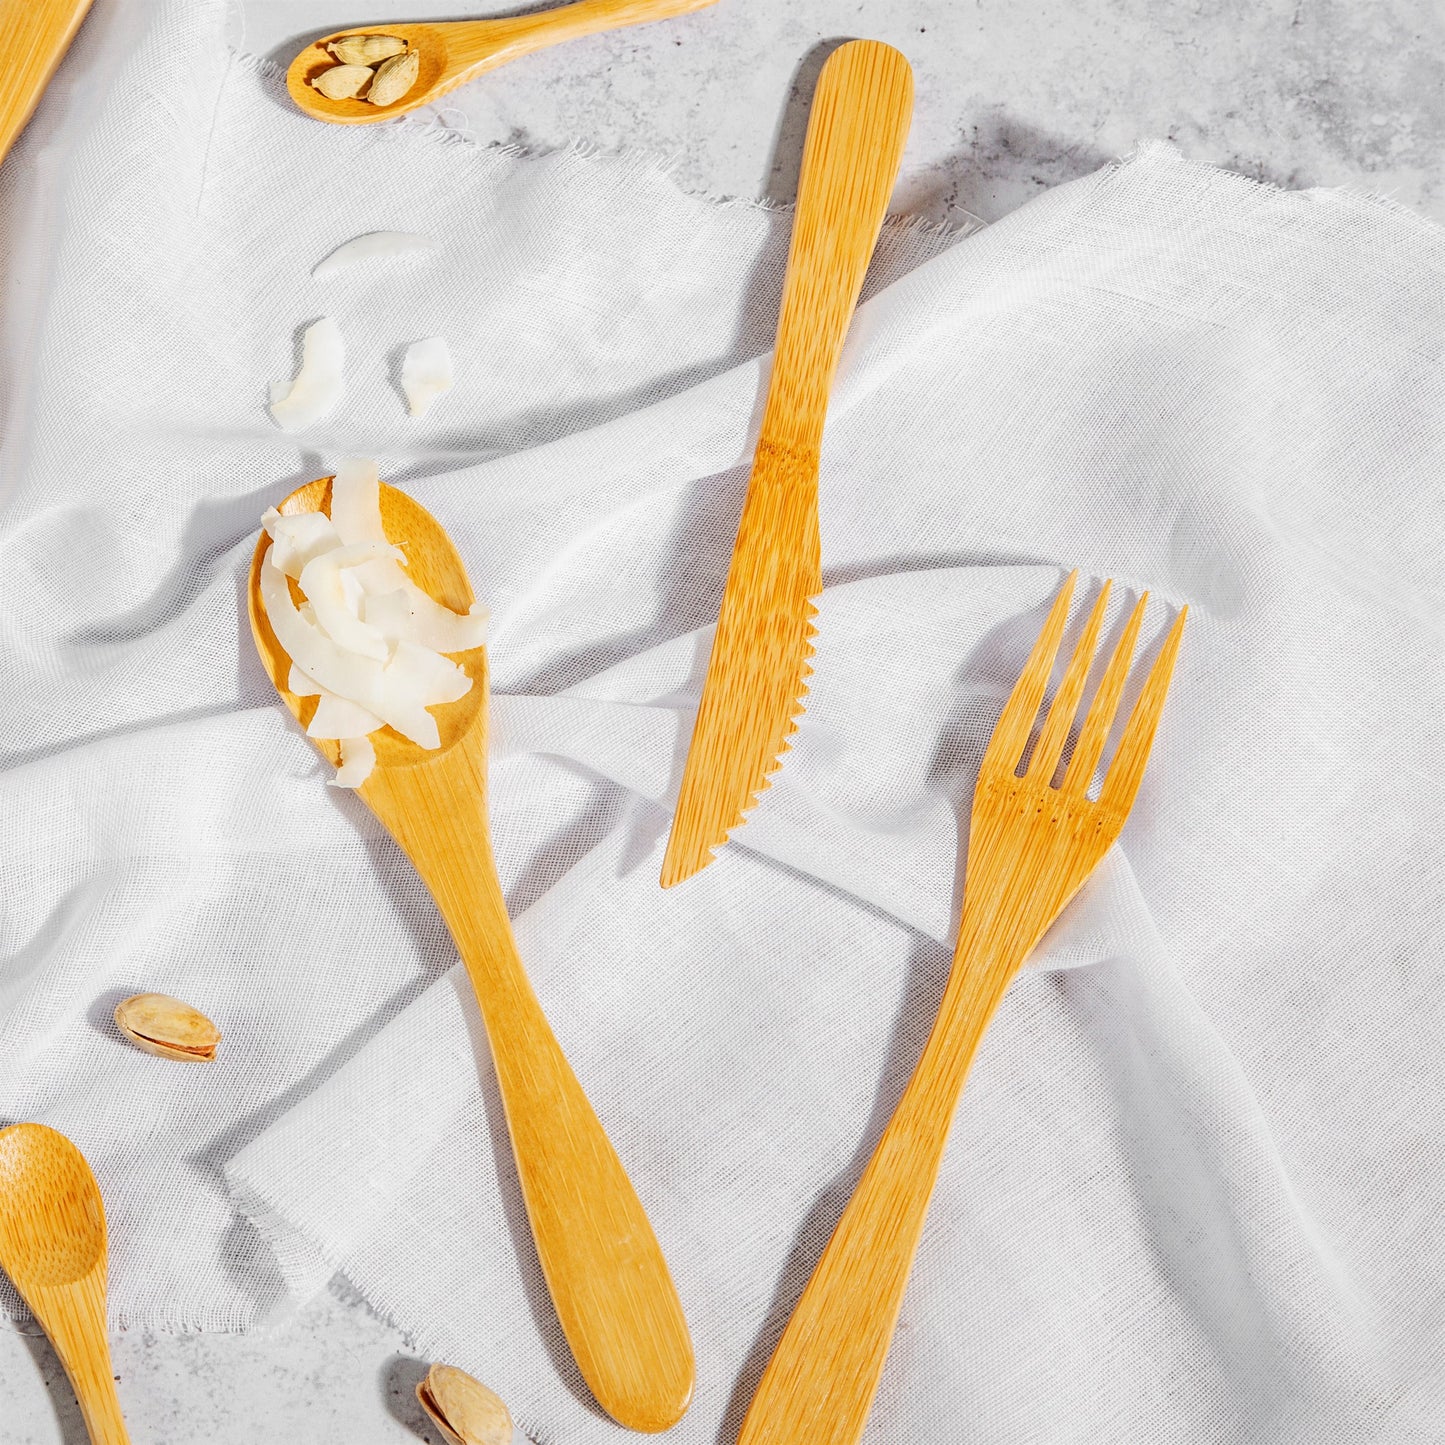 A planet-friendly everyday reusable, this bamboo cutlery set features a fork, knife and spoon.